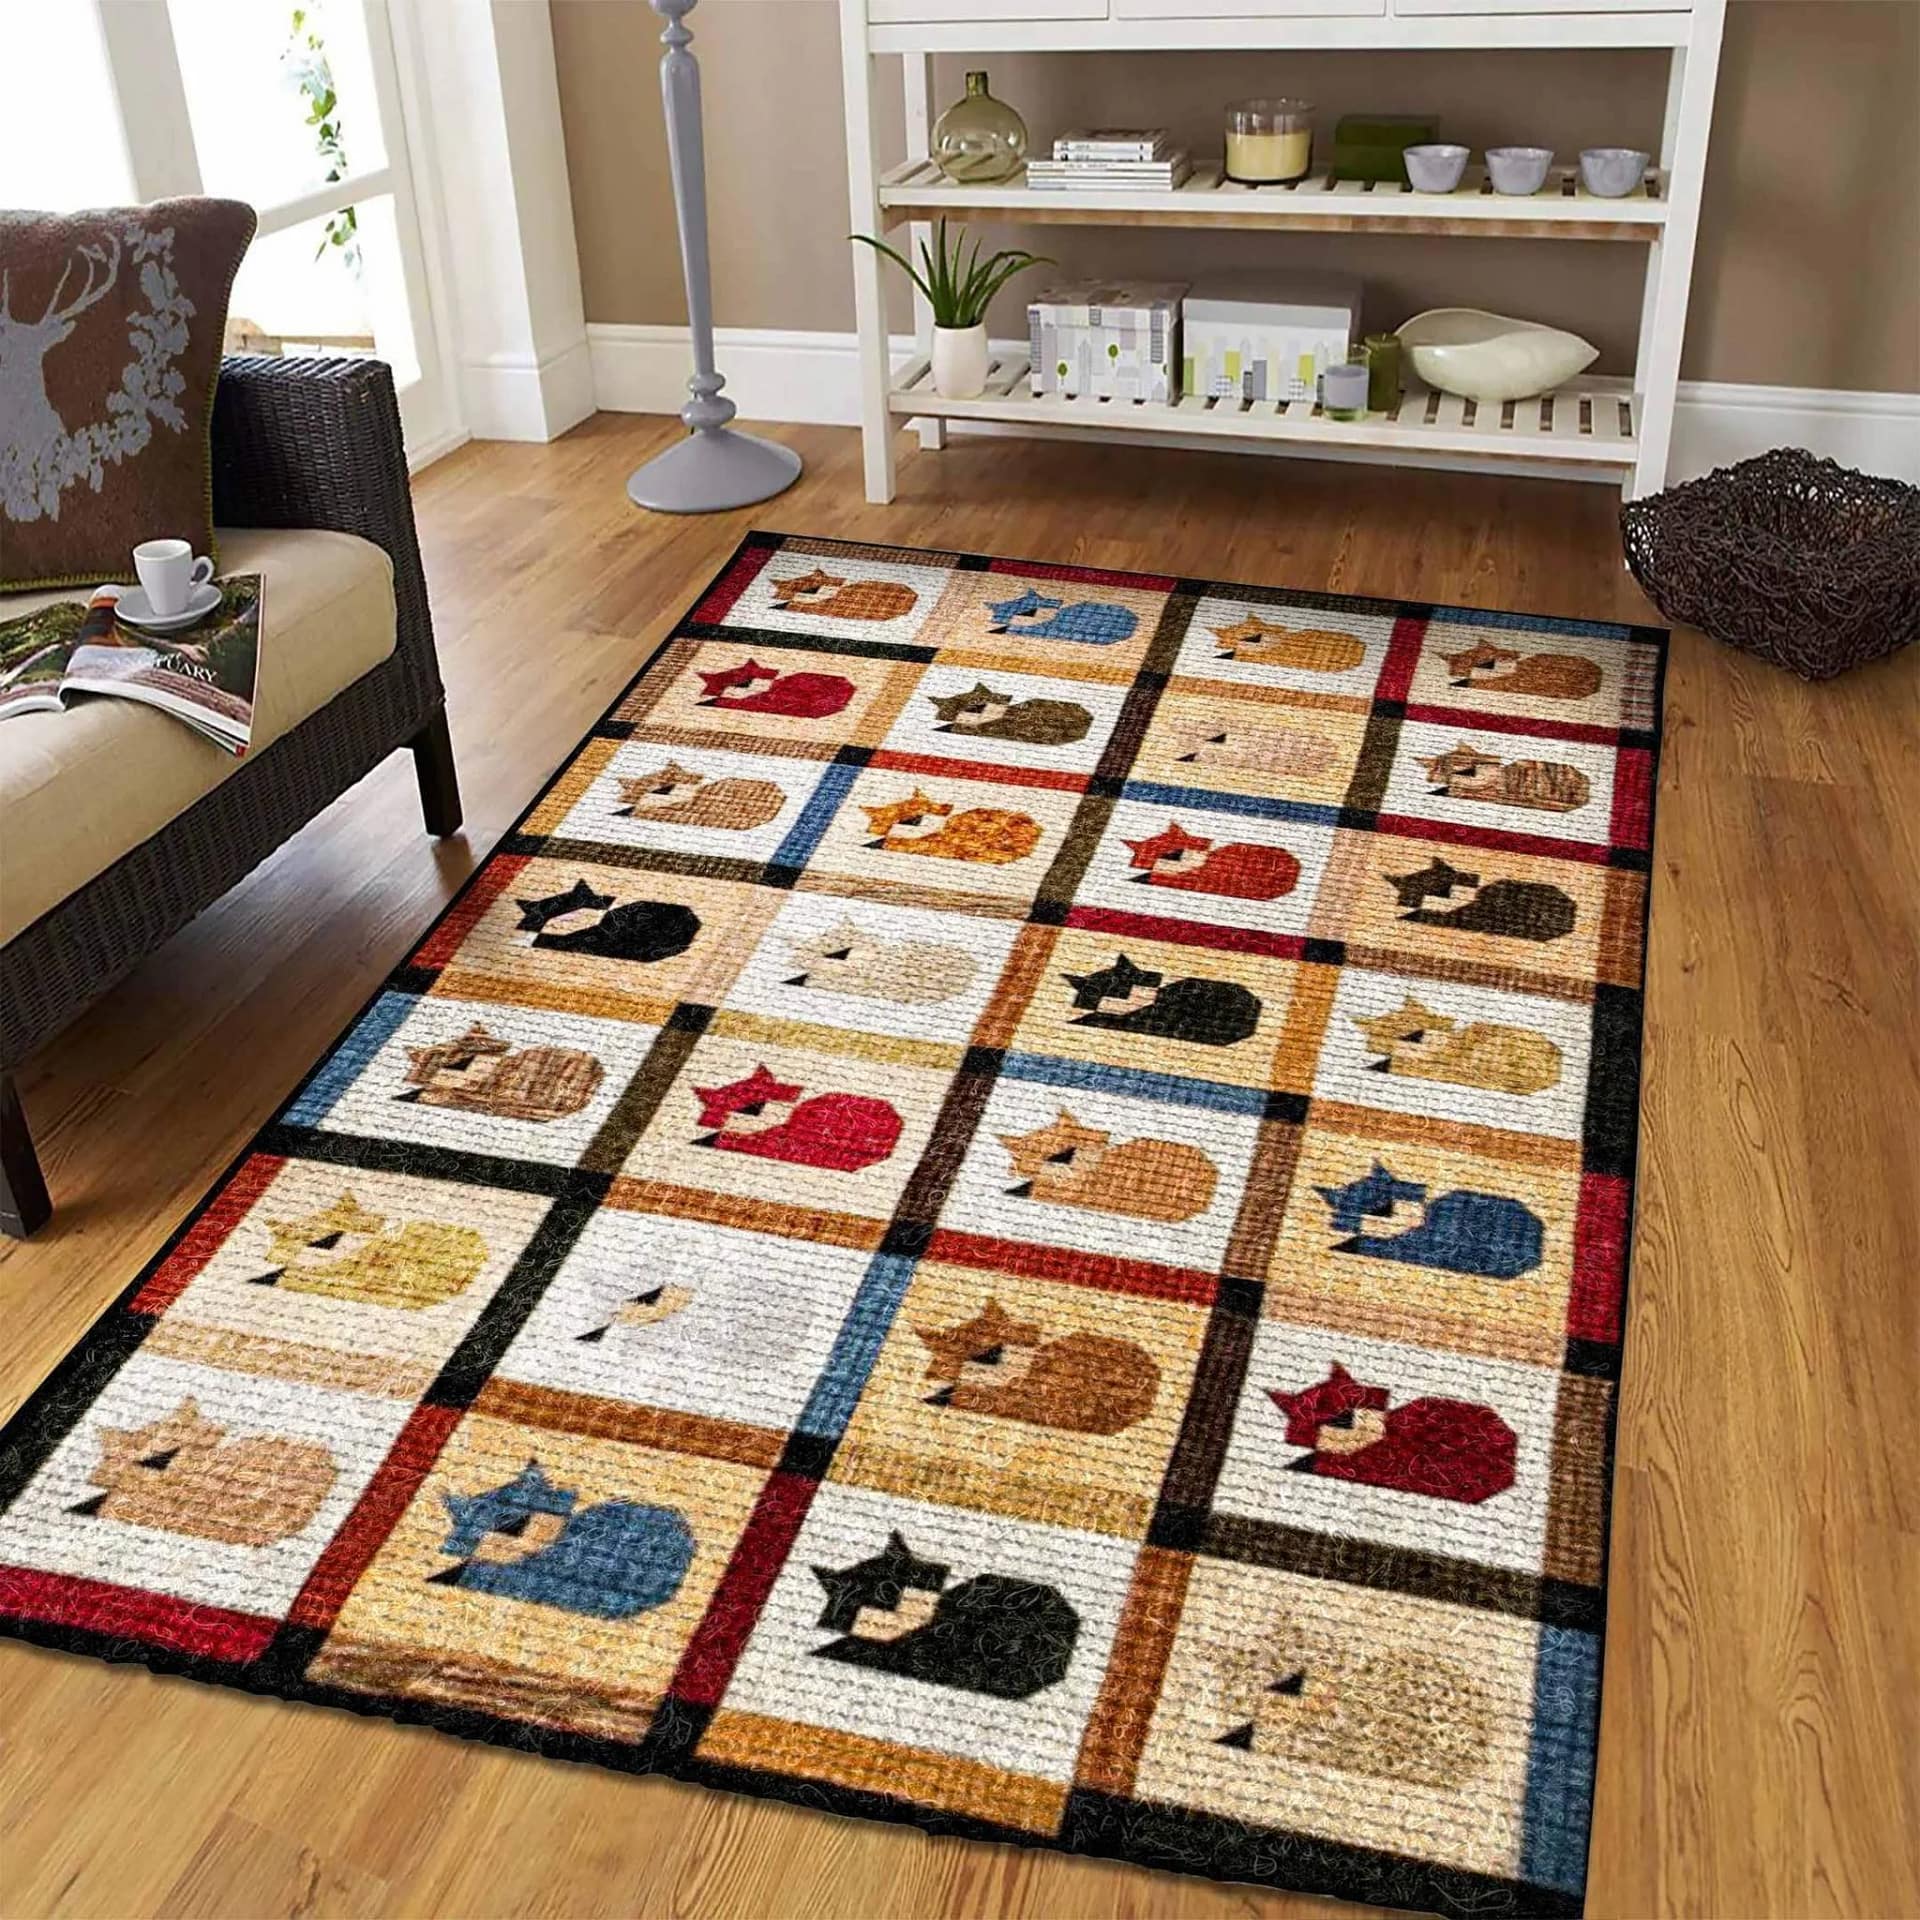 Cat Limited Edition Amazon Best Seller Sku 262544 Rug